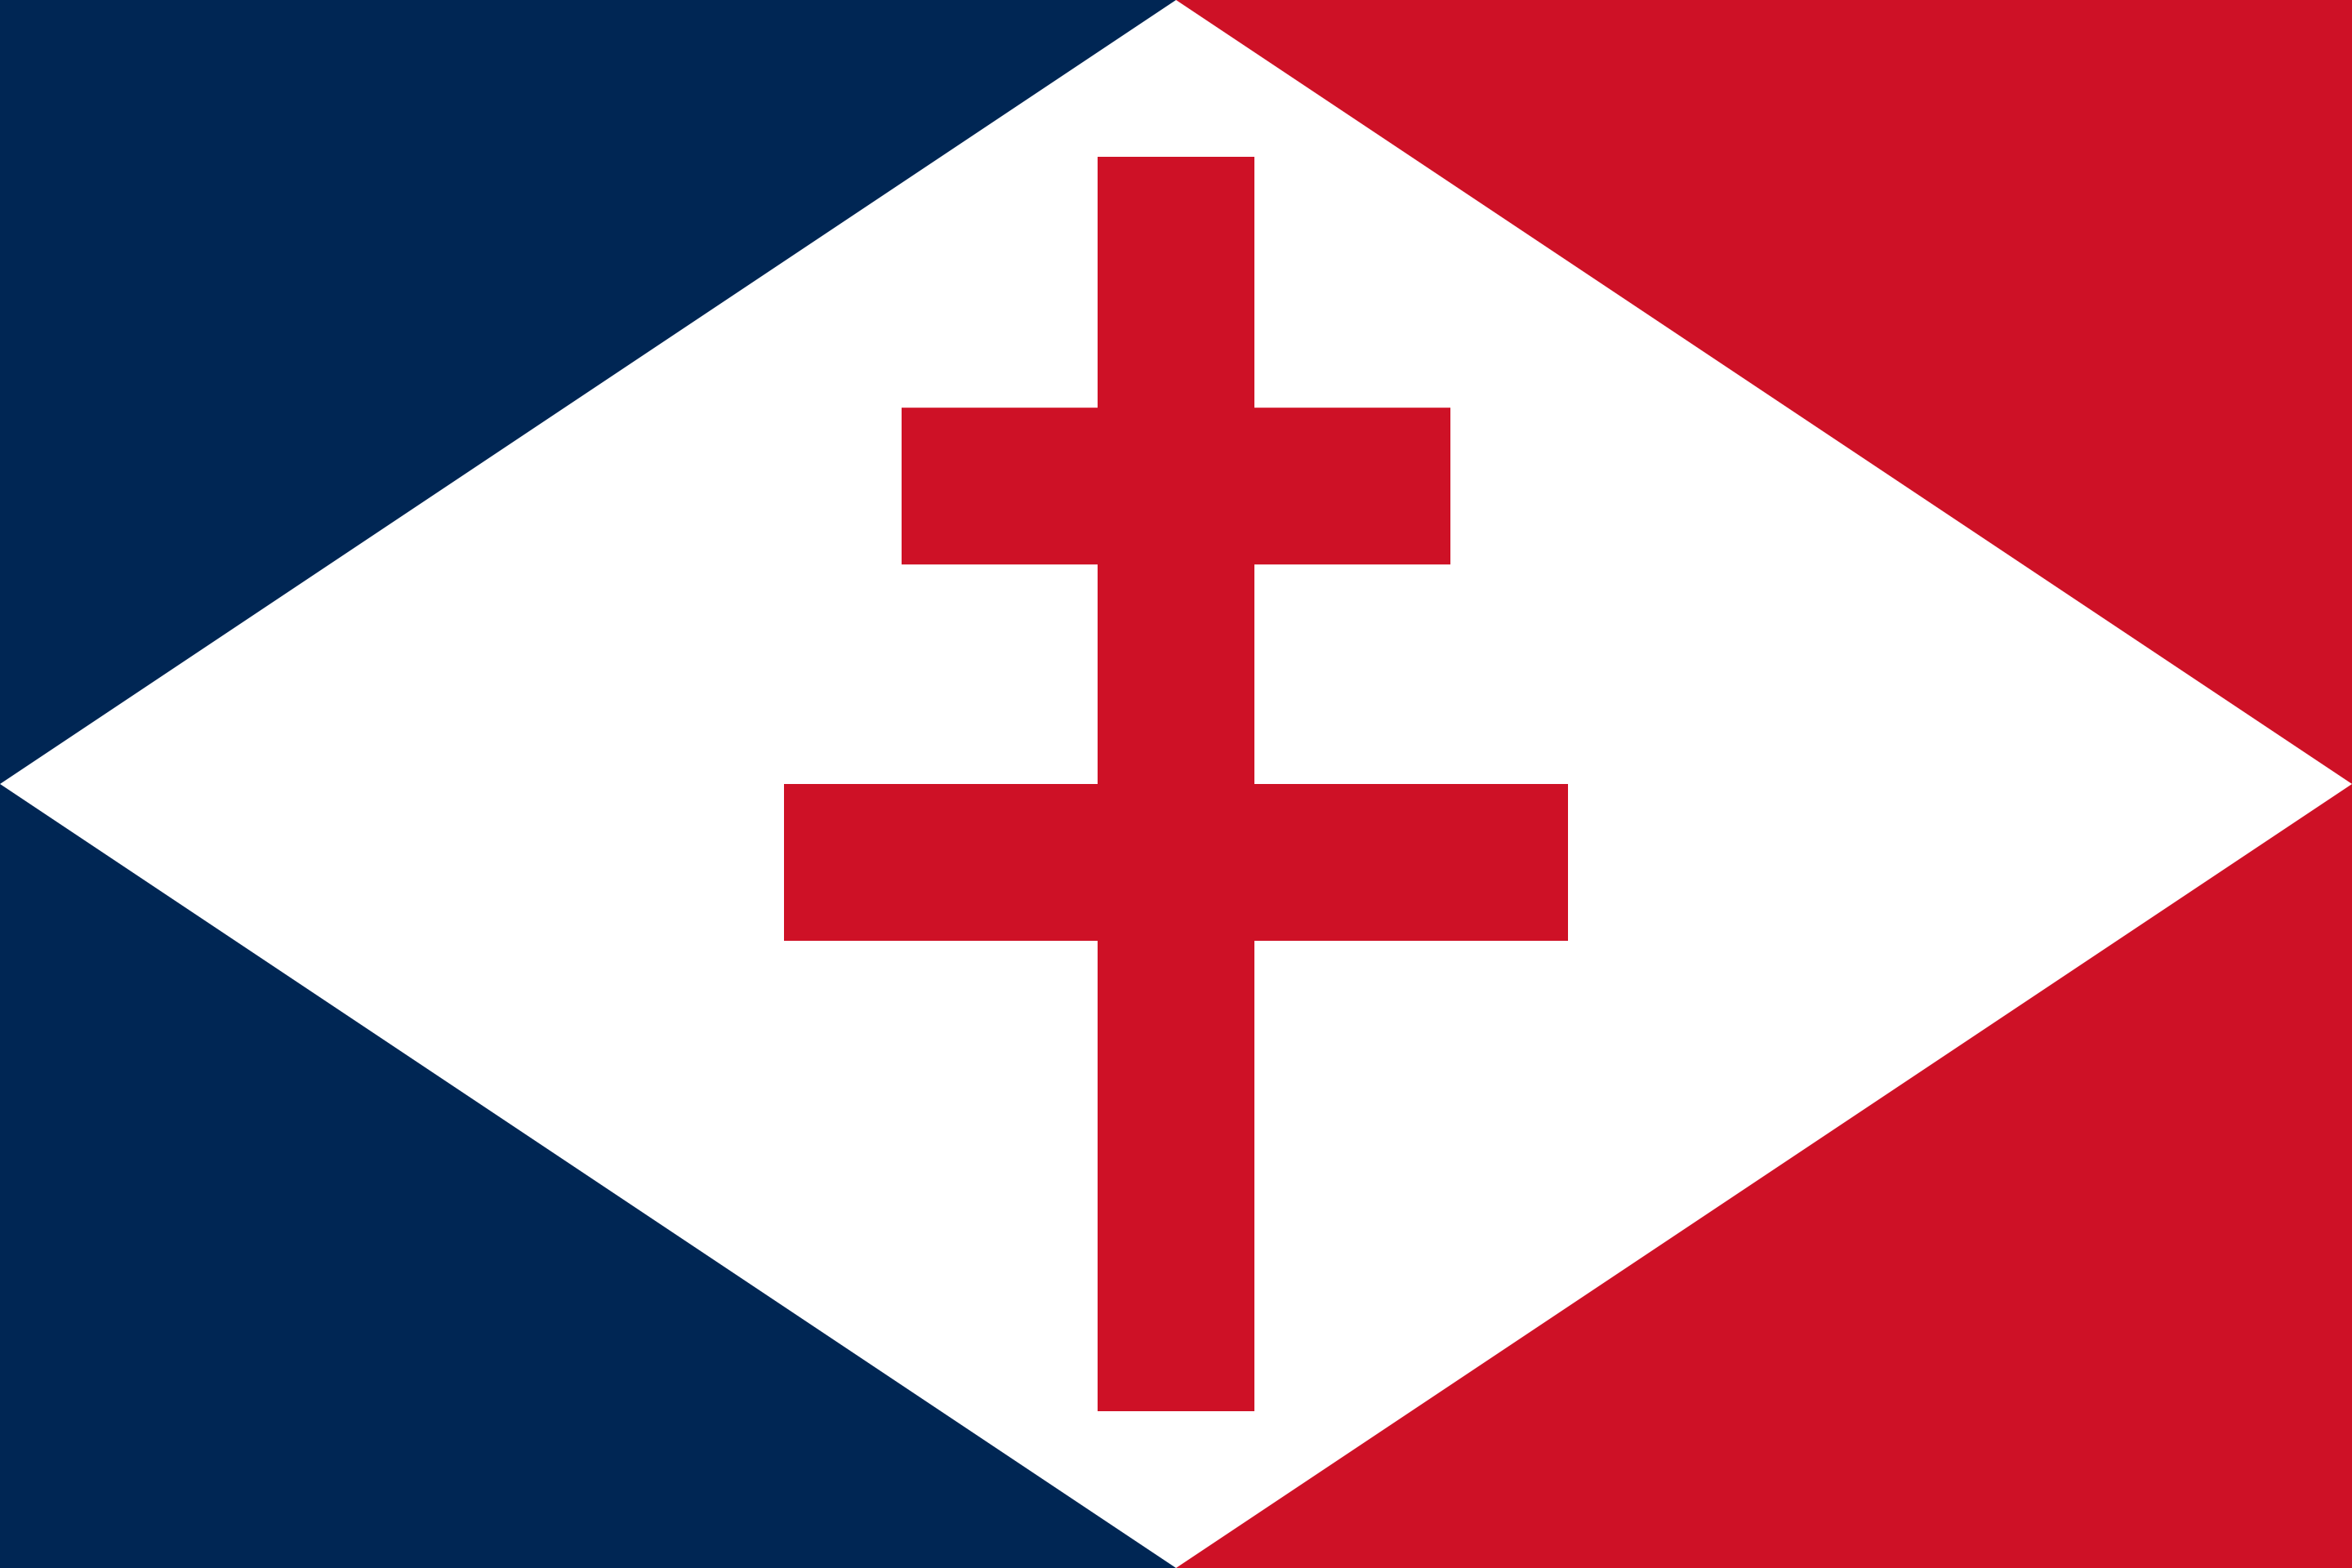 the ensign of the Free French Navy, featuring the cross of Lorraine